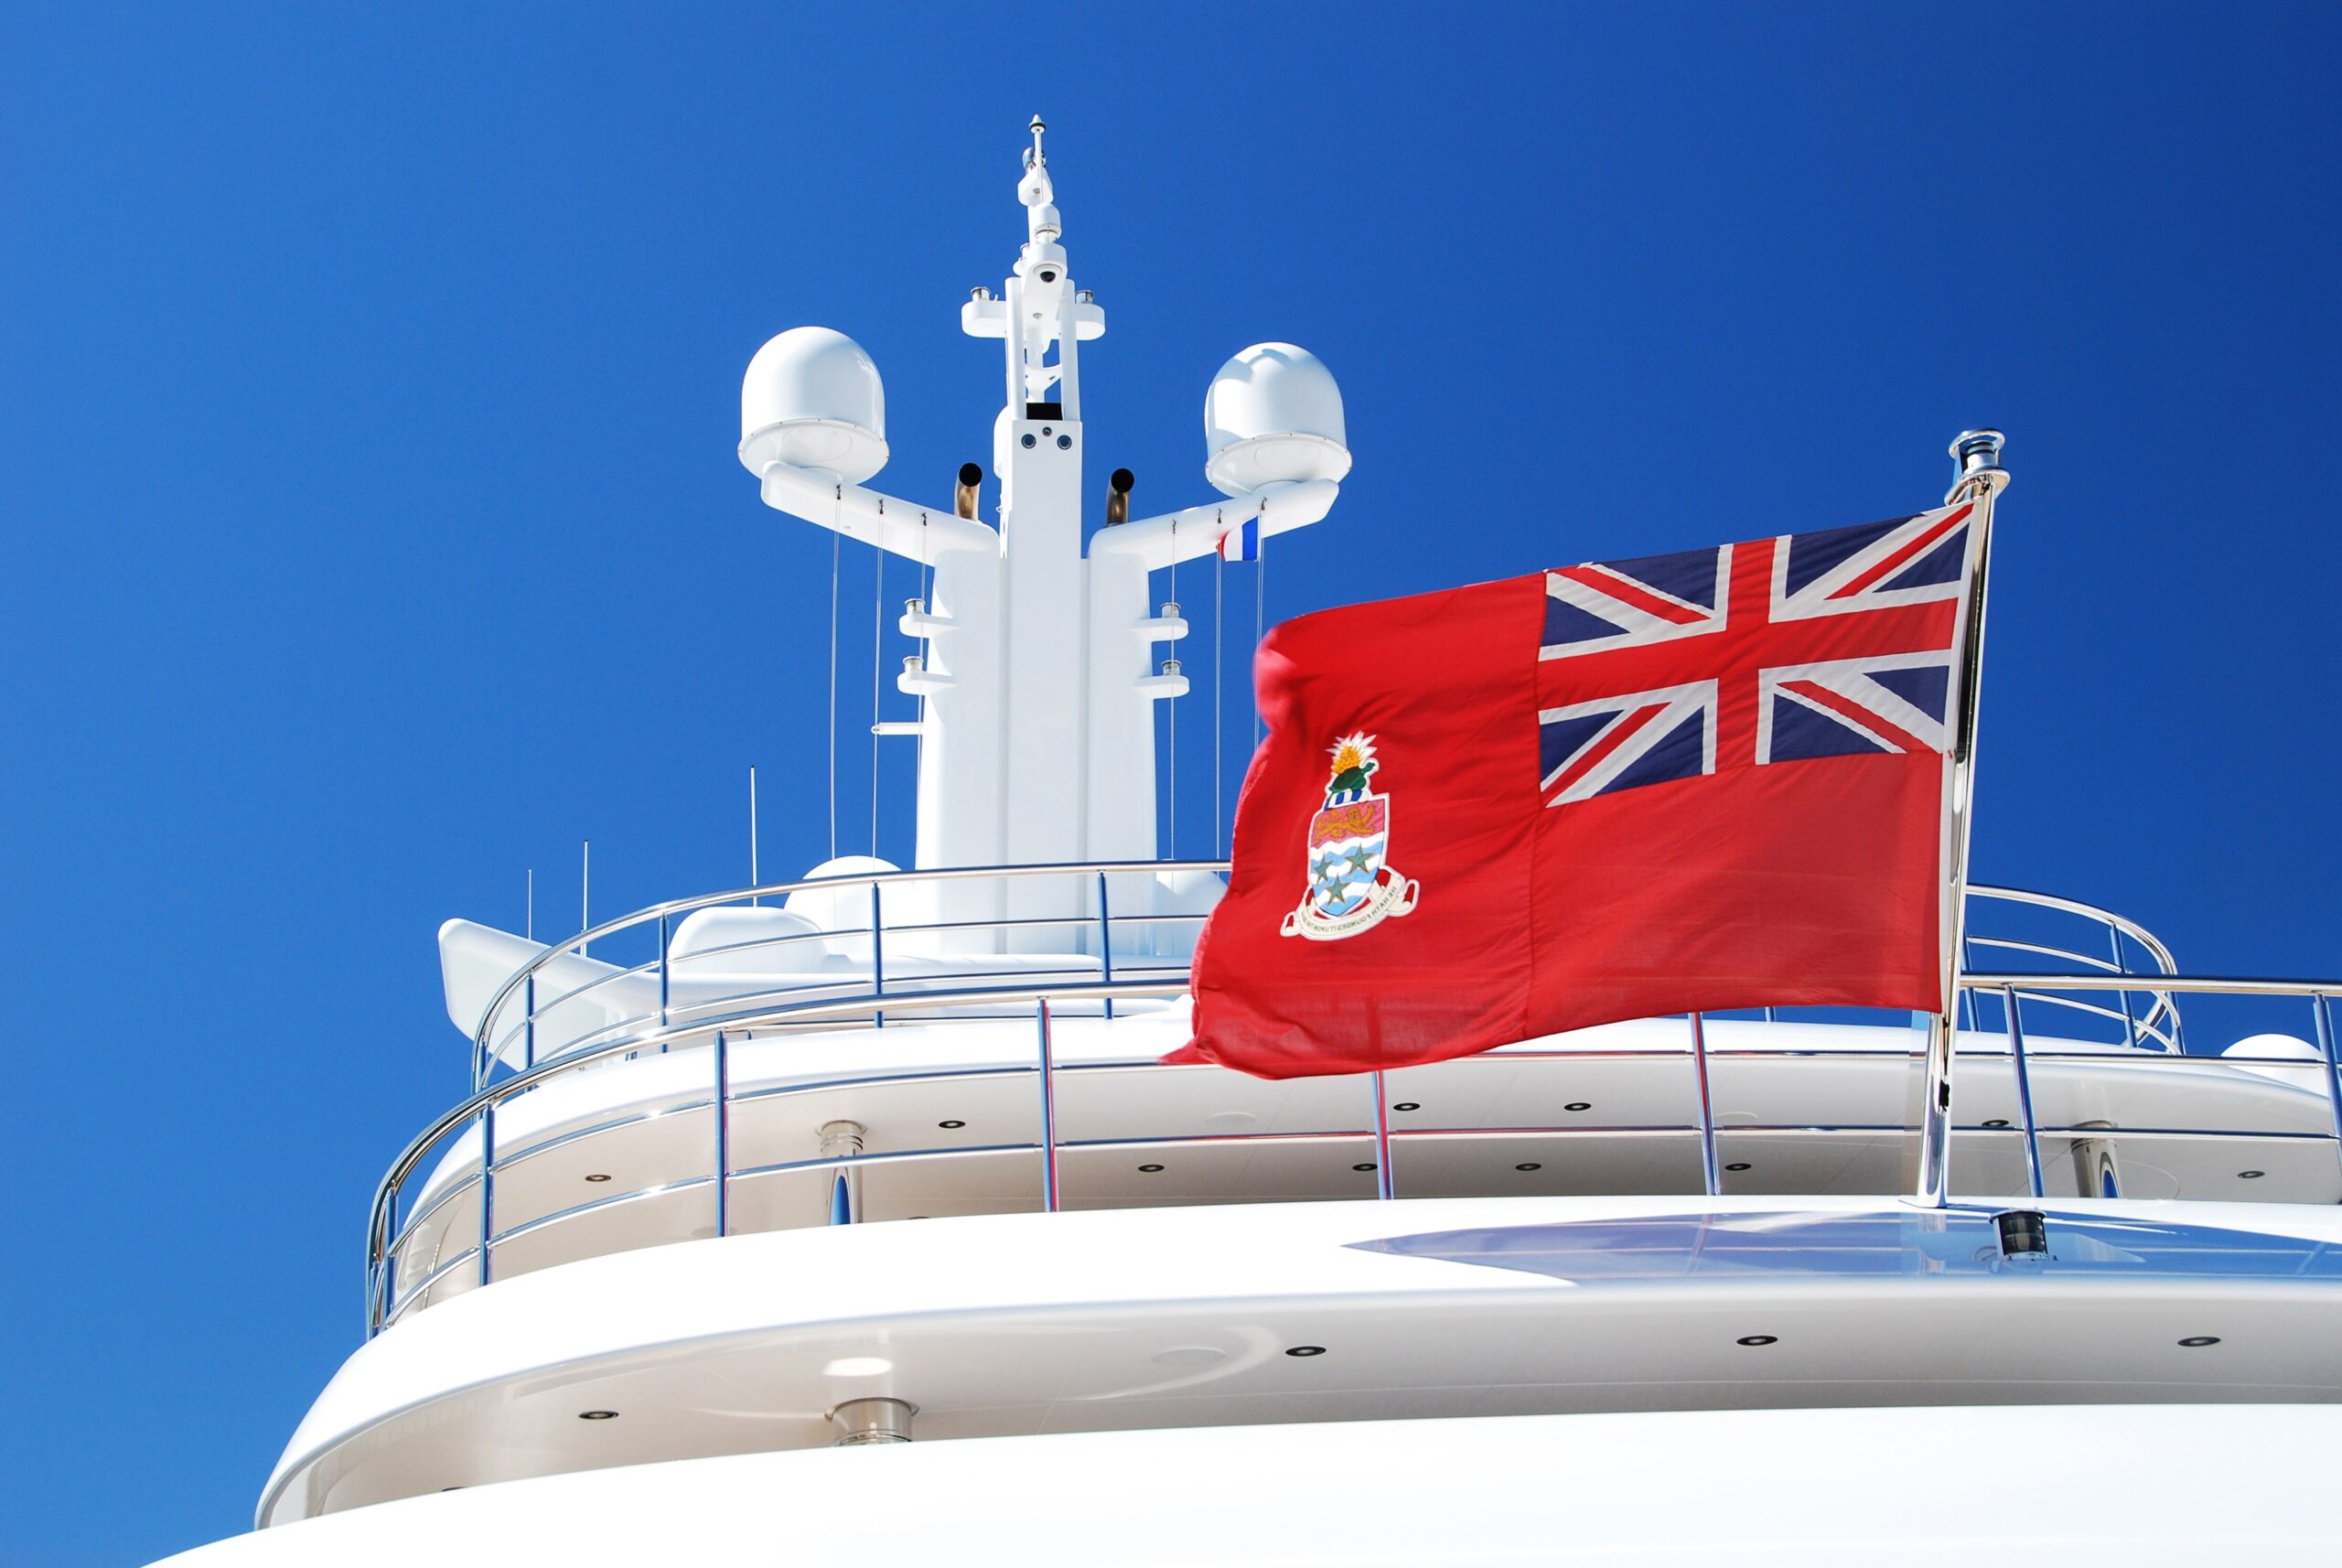 red ensign on yachts